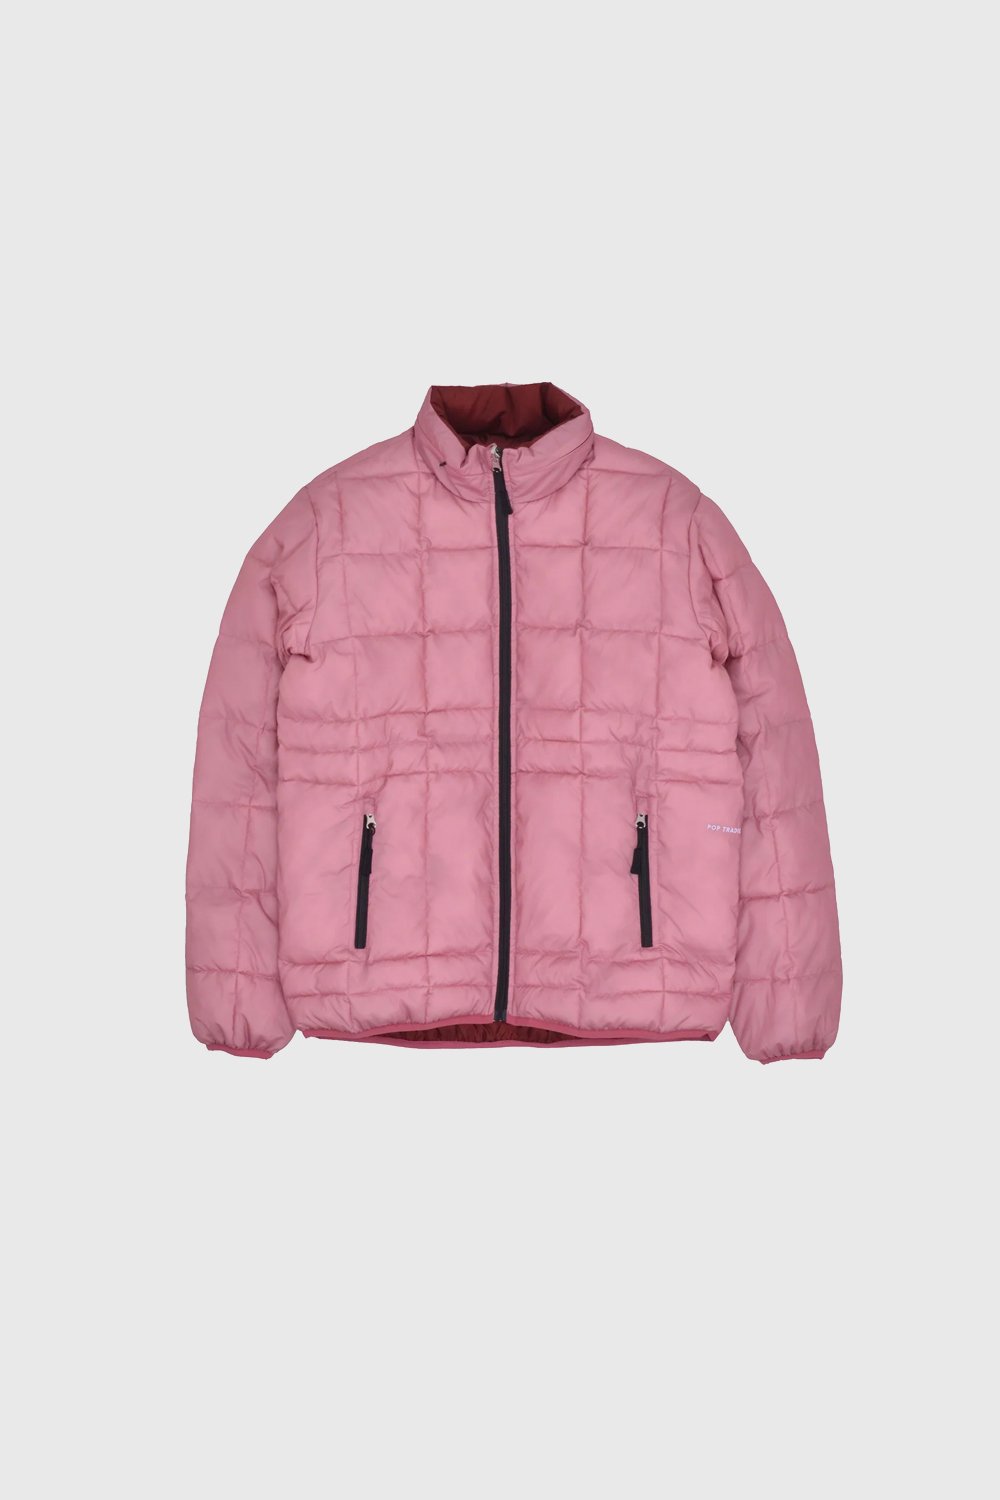 Pop Trading Company Quilted Reversible Puffer JKT Mesa rose/fired